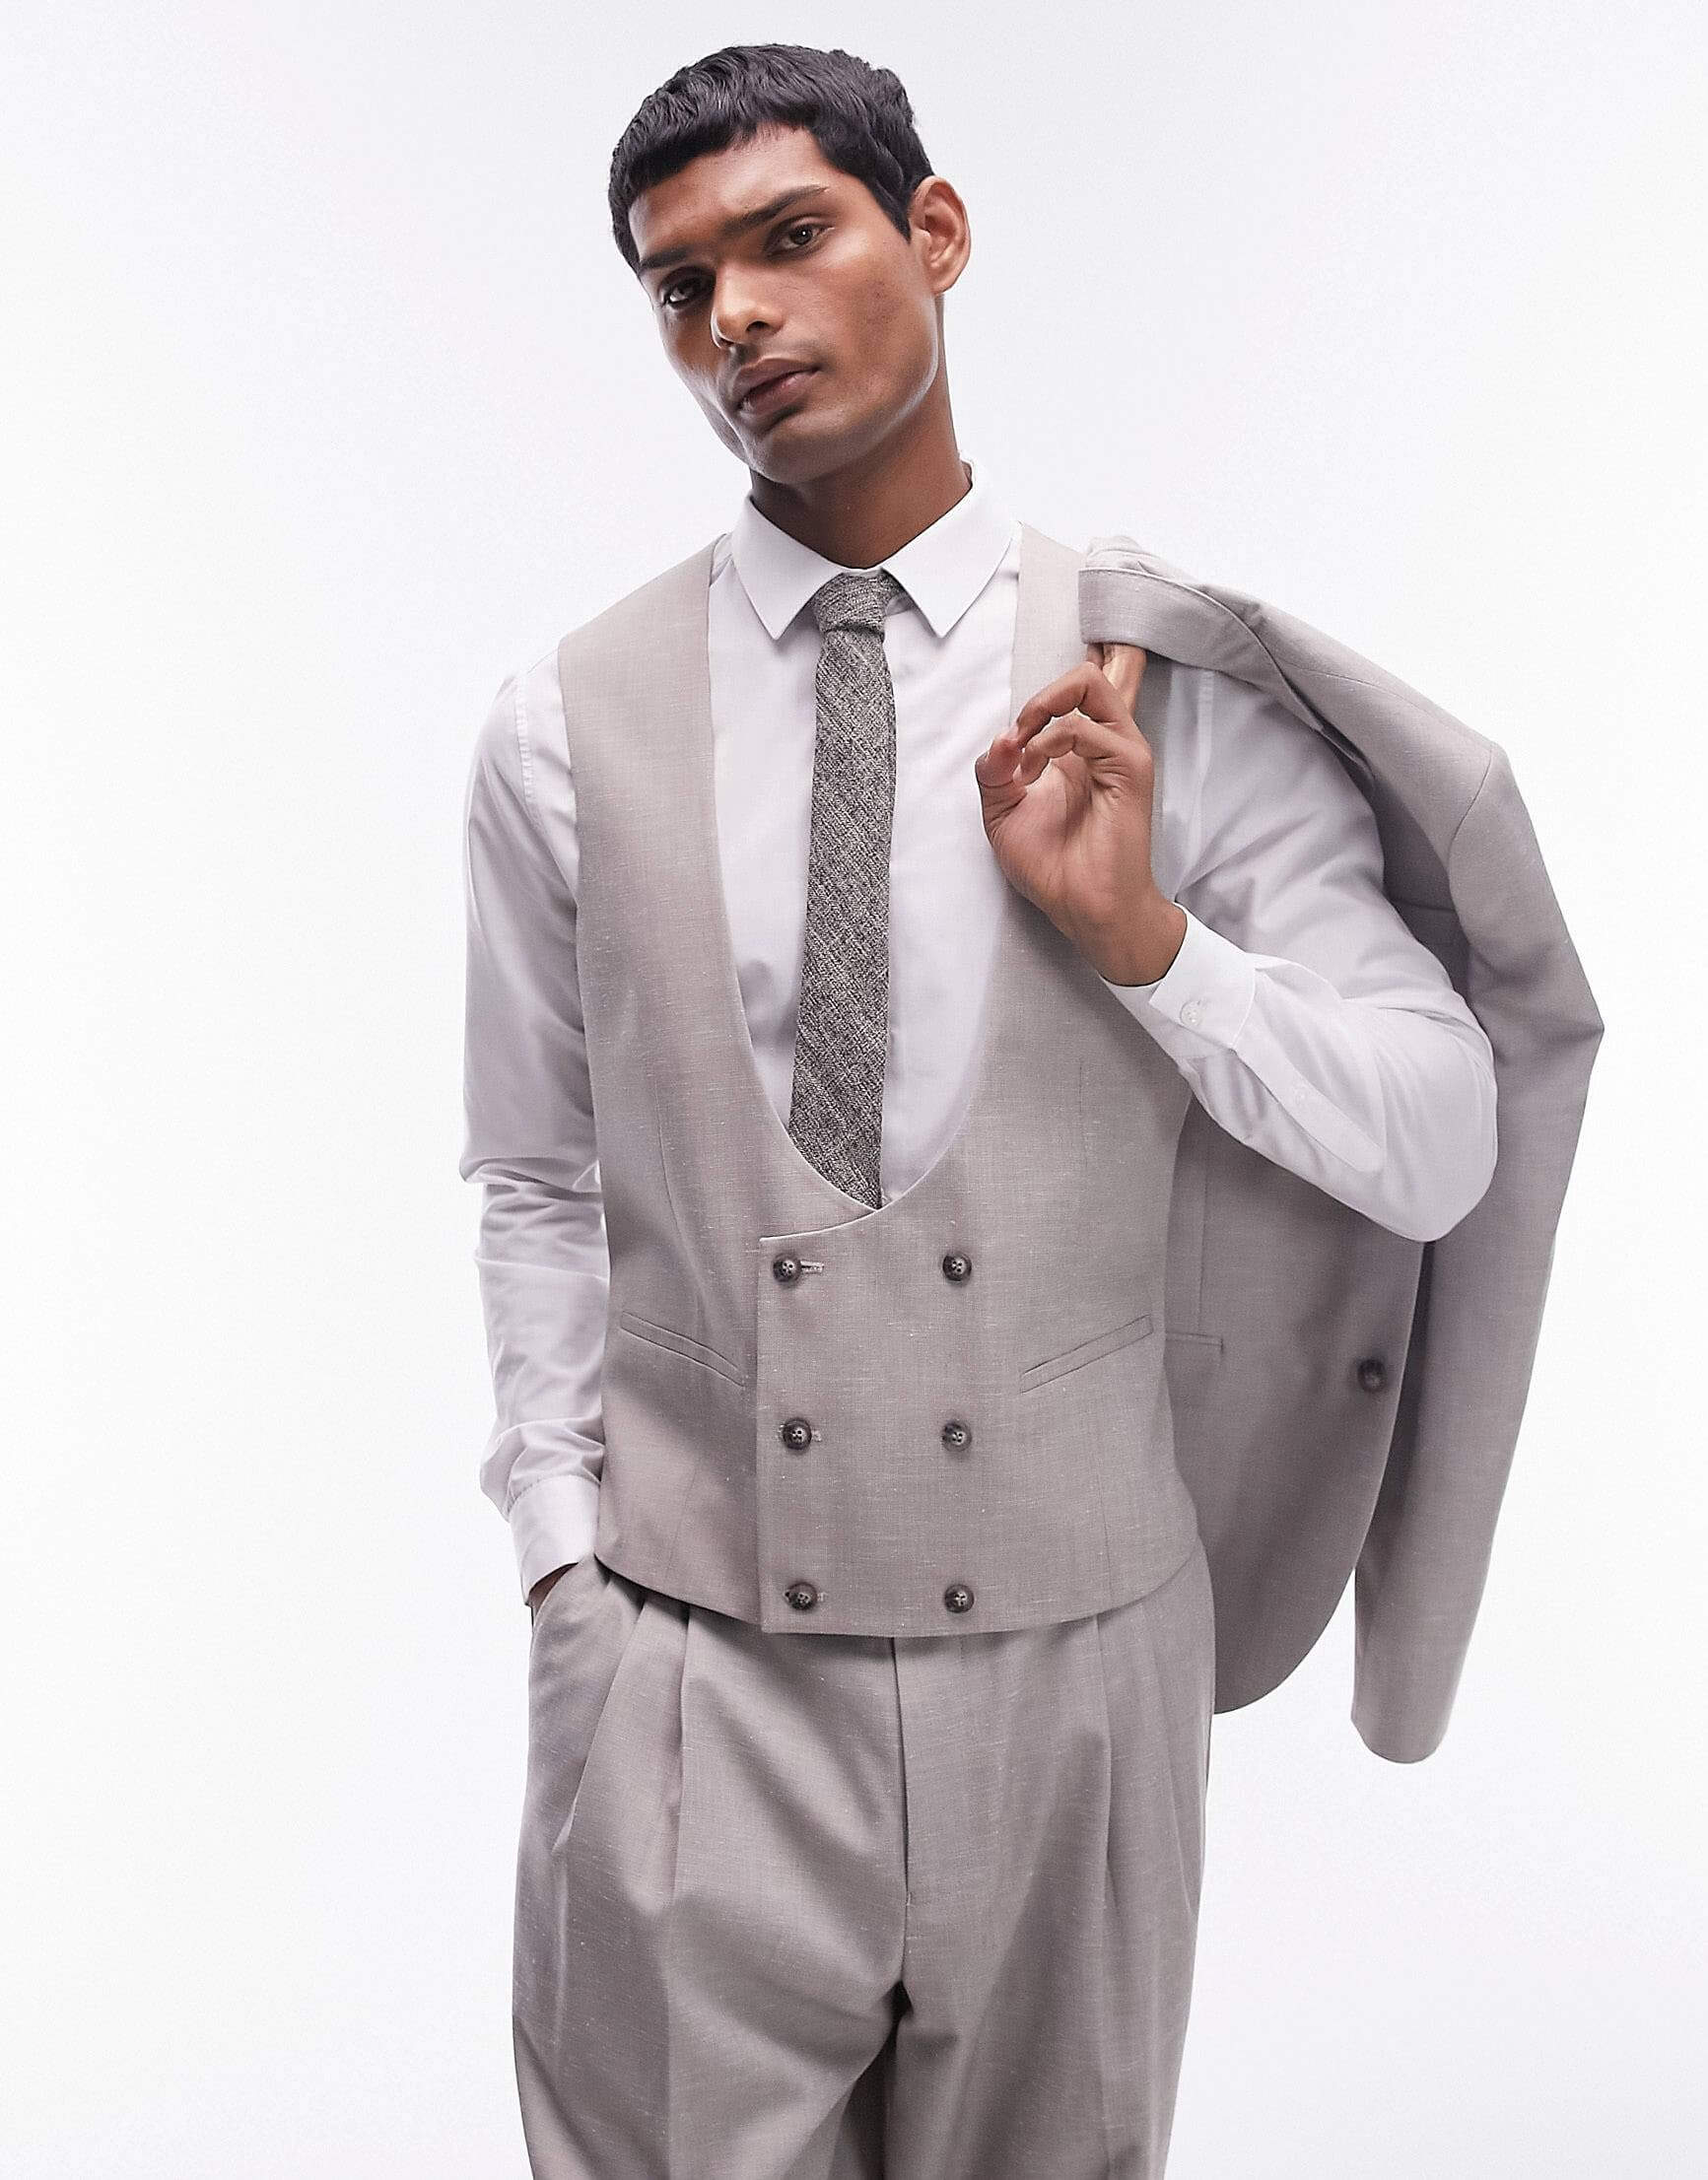 Жилет Topman With A Fitted Cut Made Of Linen-Blend Material, серо-бежевый